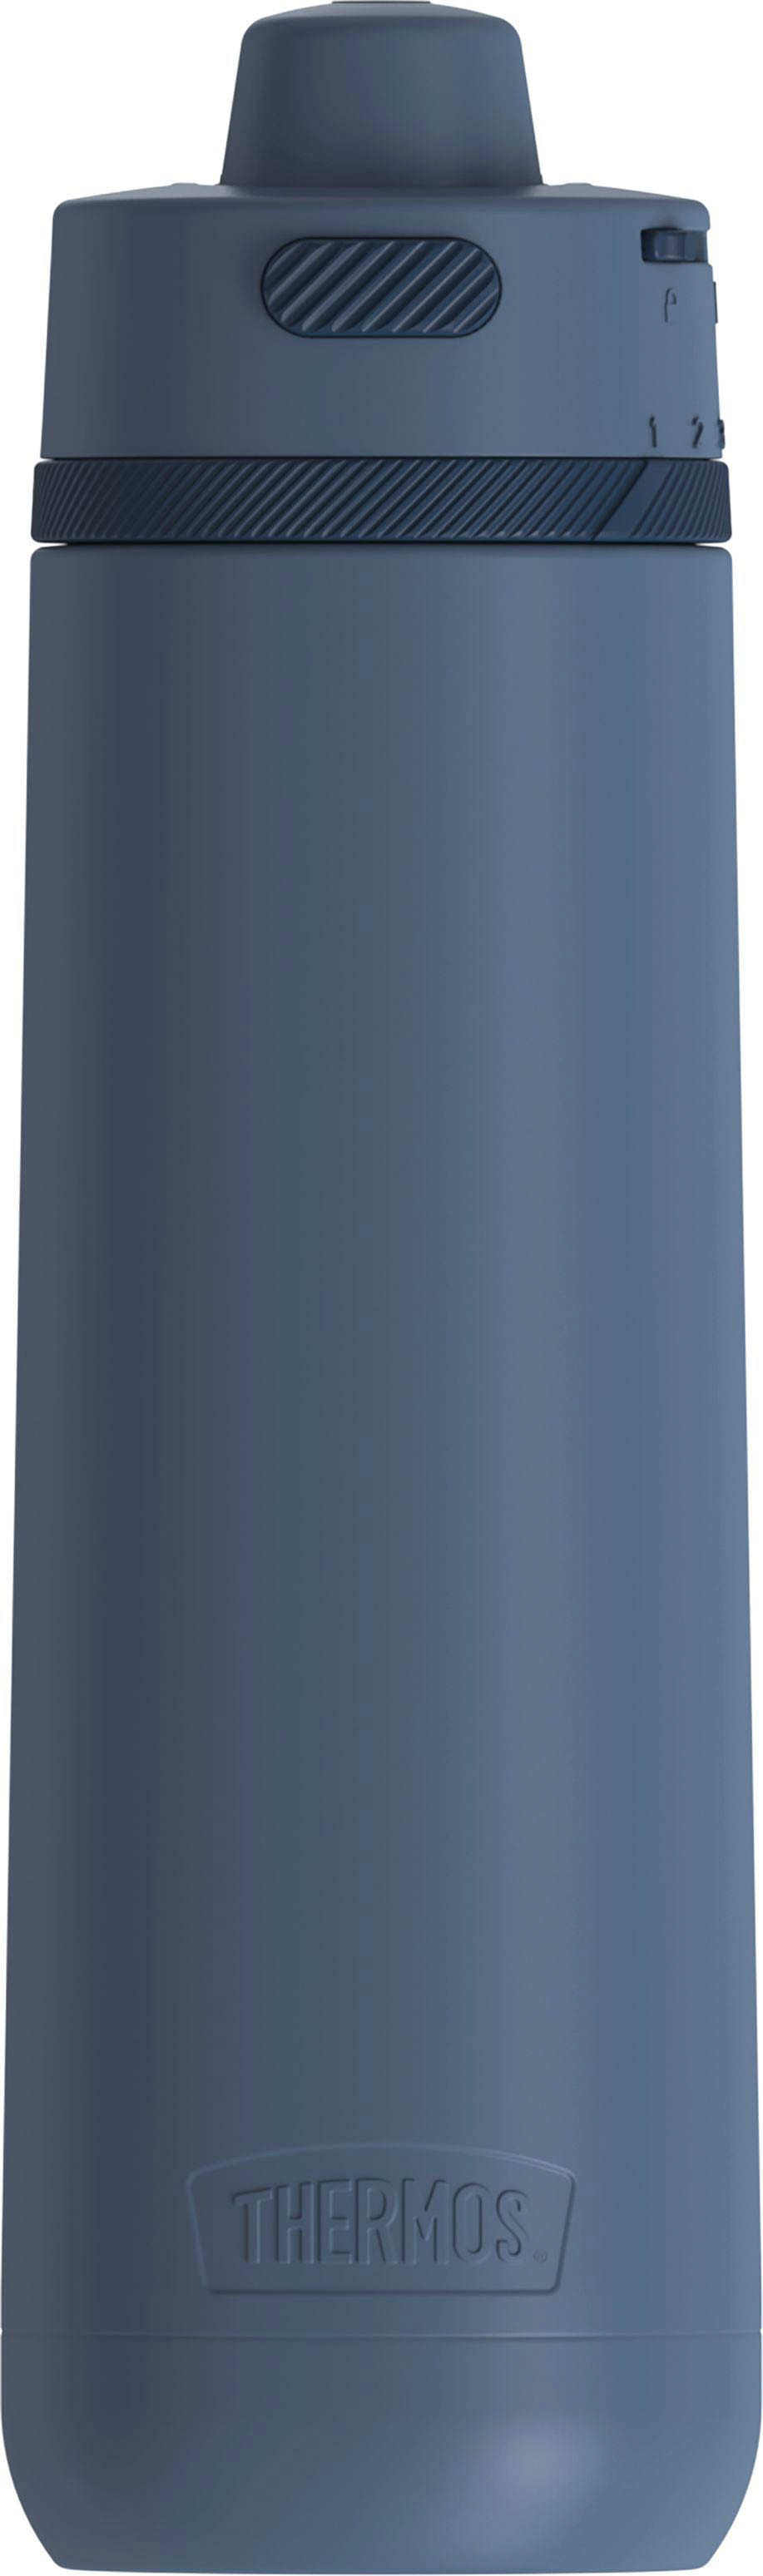 THERMOS Thermobehälter »GUARDIAN BOTTLE«, (1 tlg.), 0,7 L